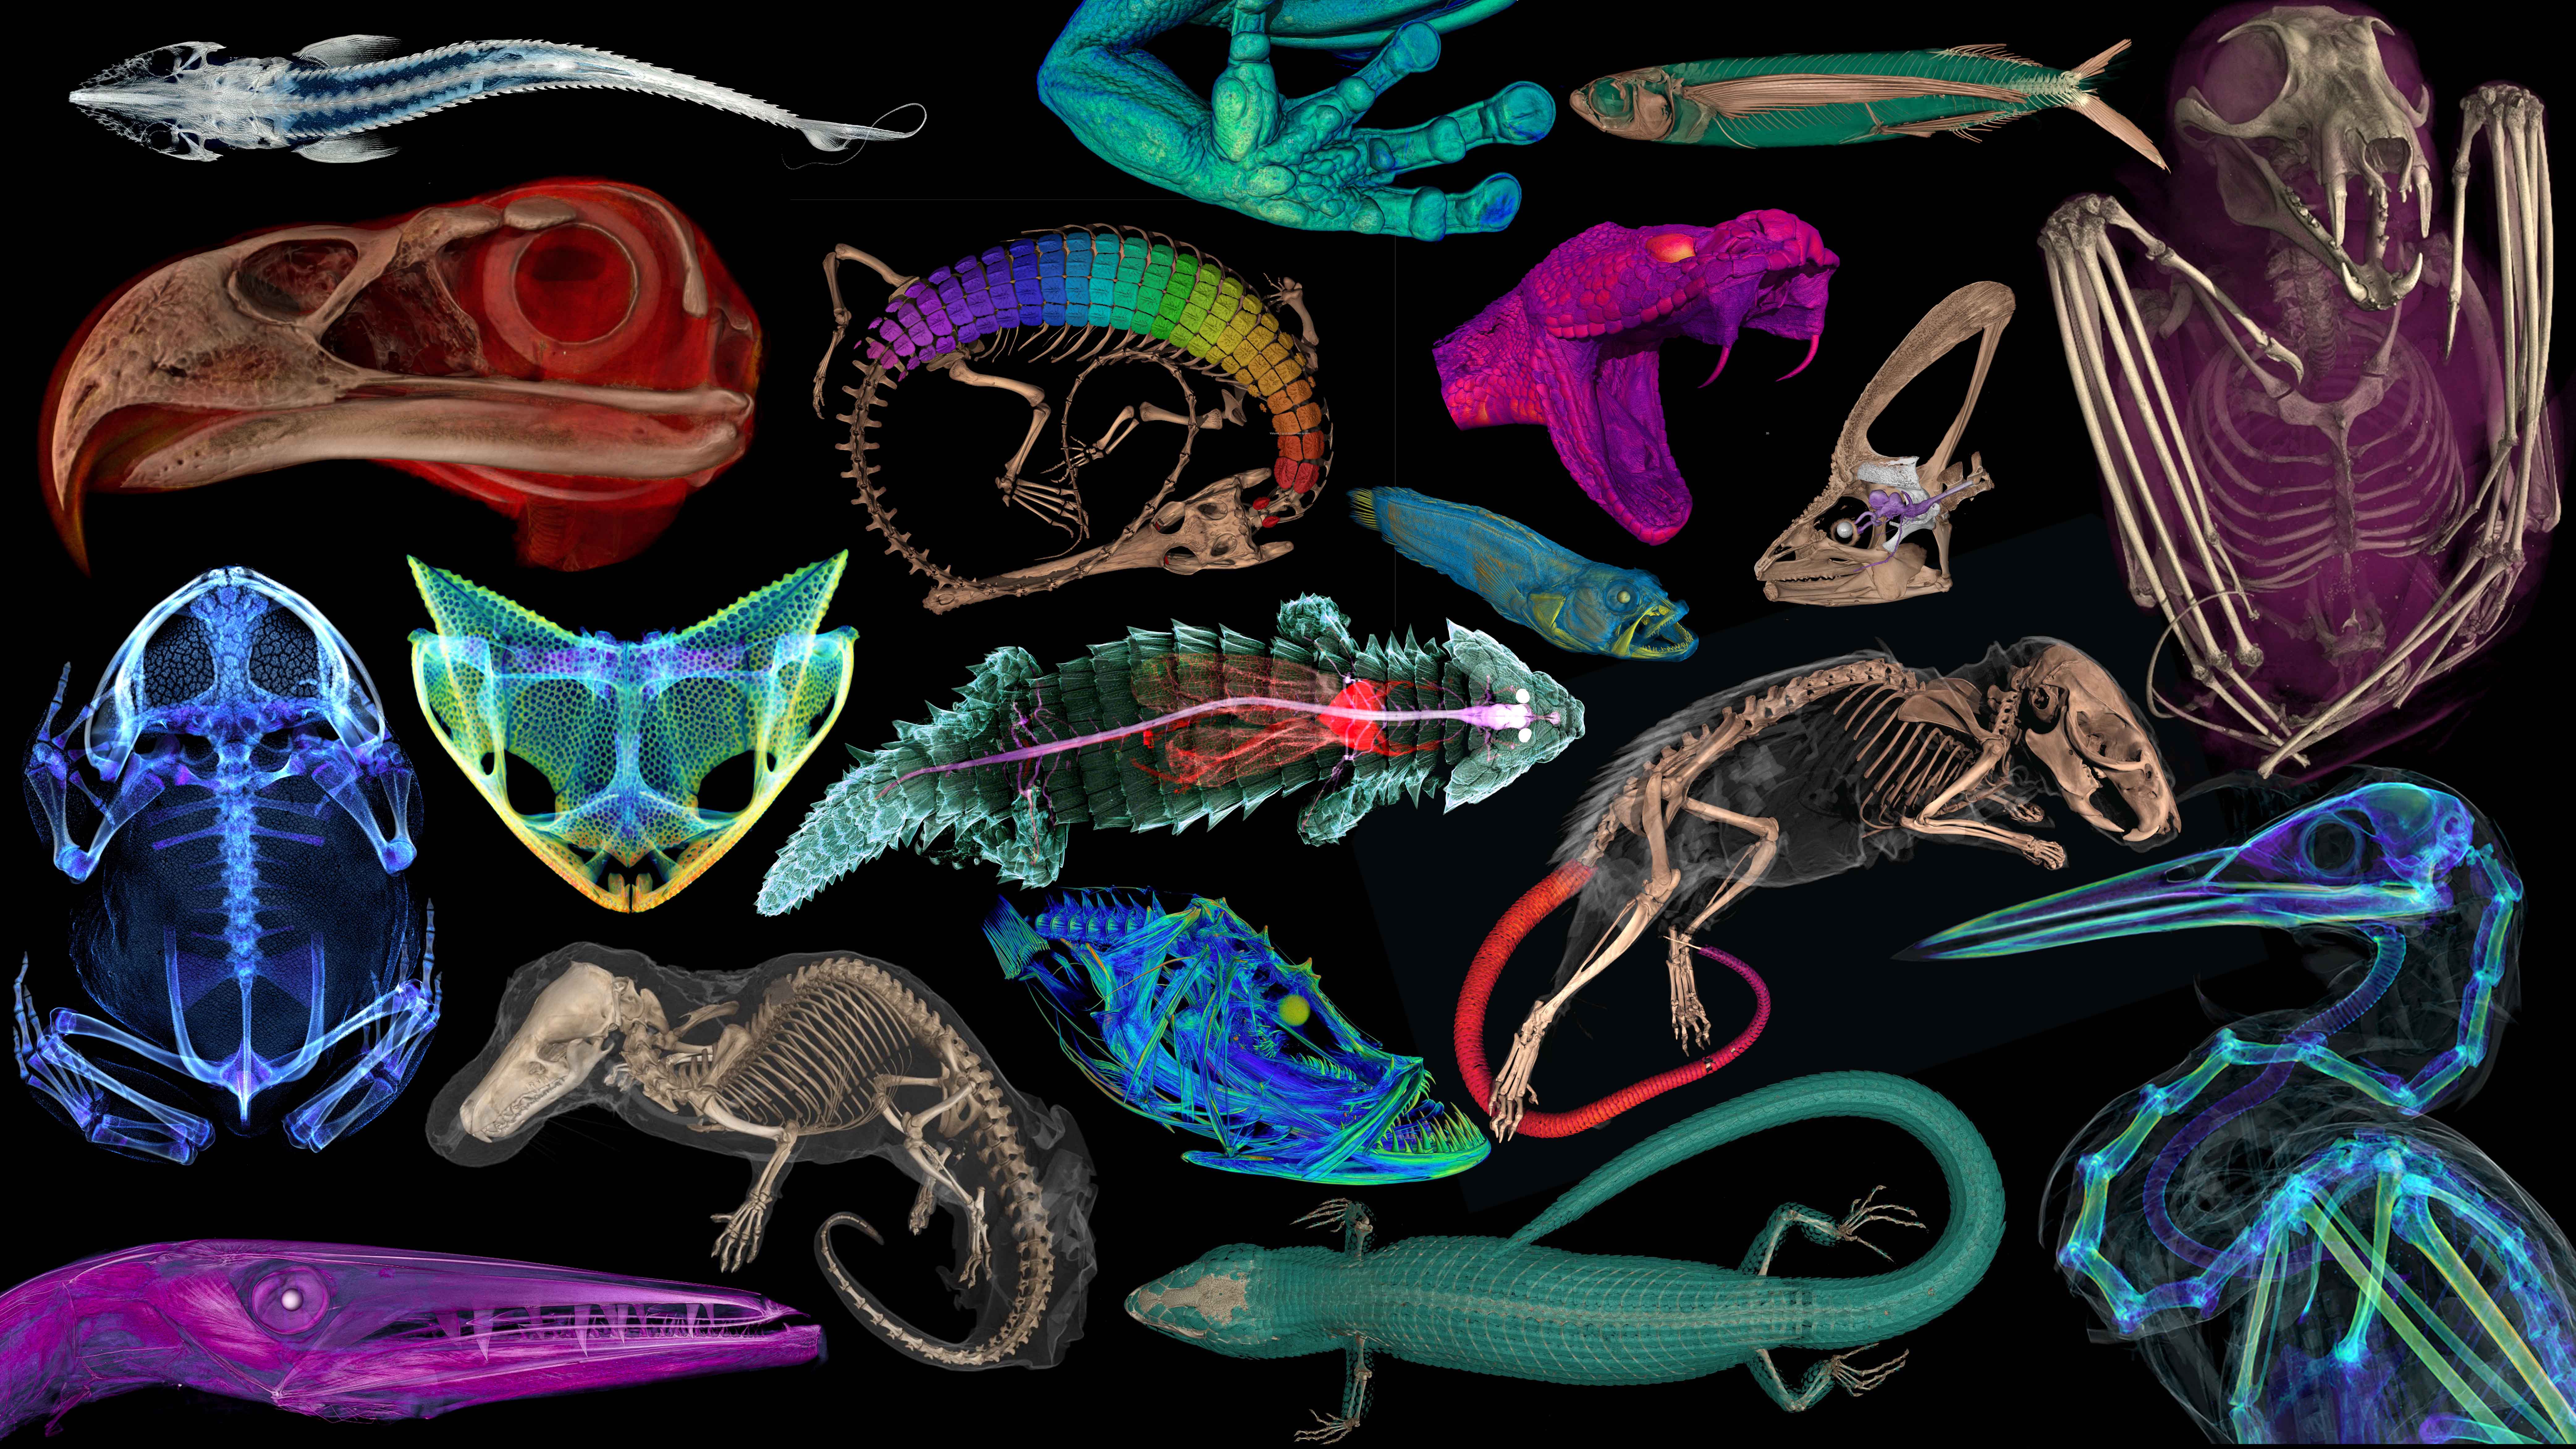 Scientists CT-scanned thousands of natural history specimens, which you can access for free